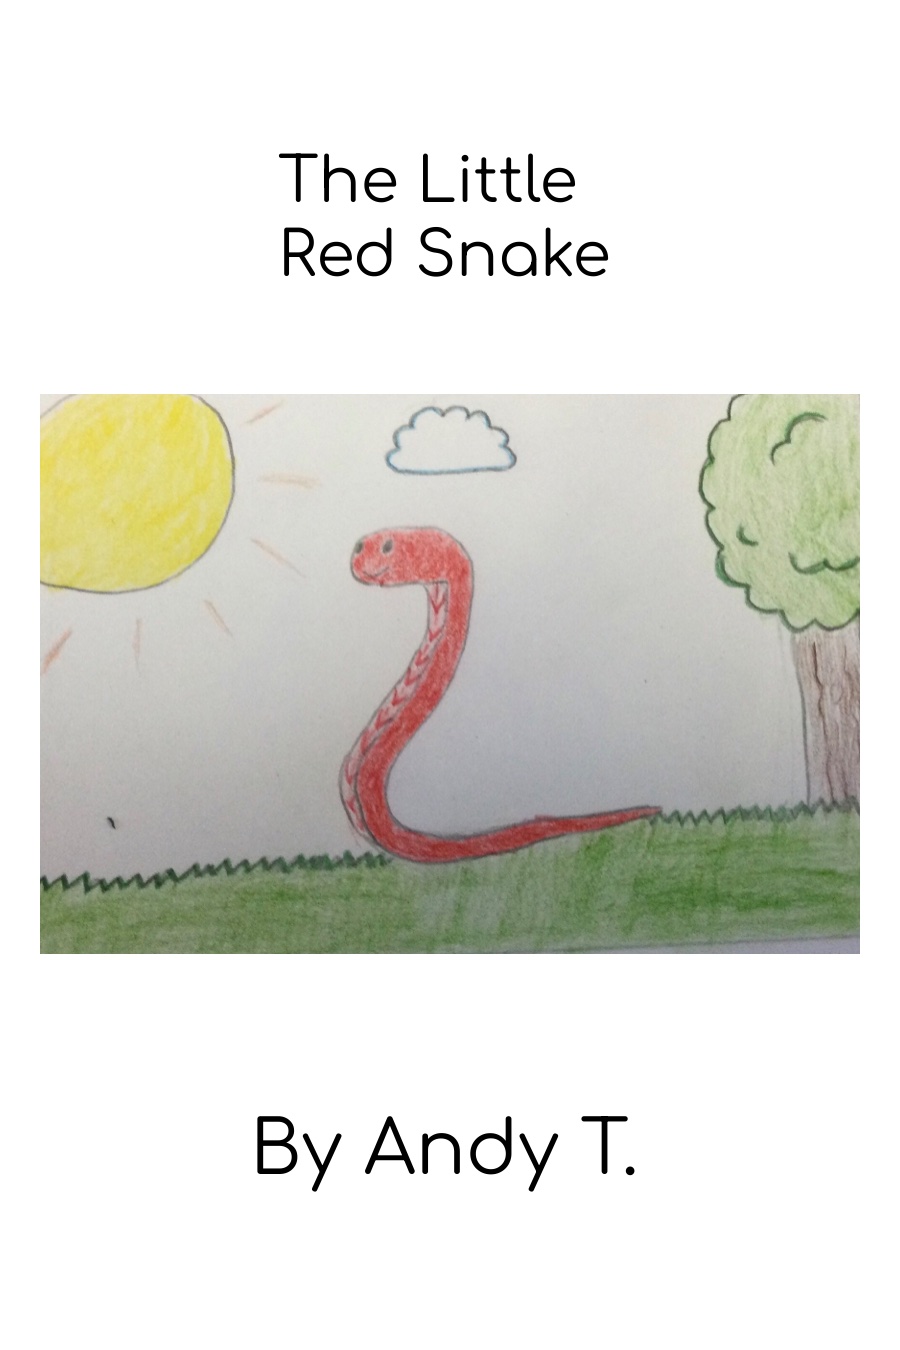 The Little Red Snake by Andy T